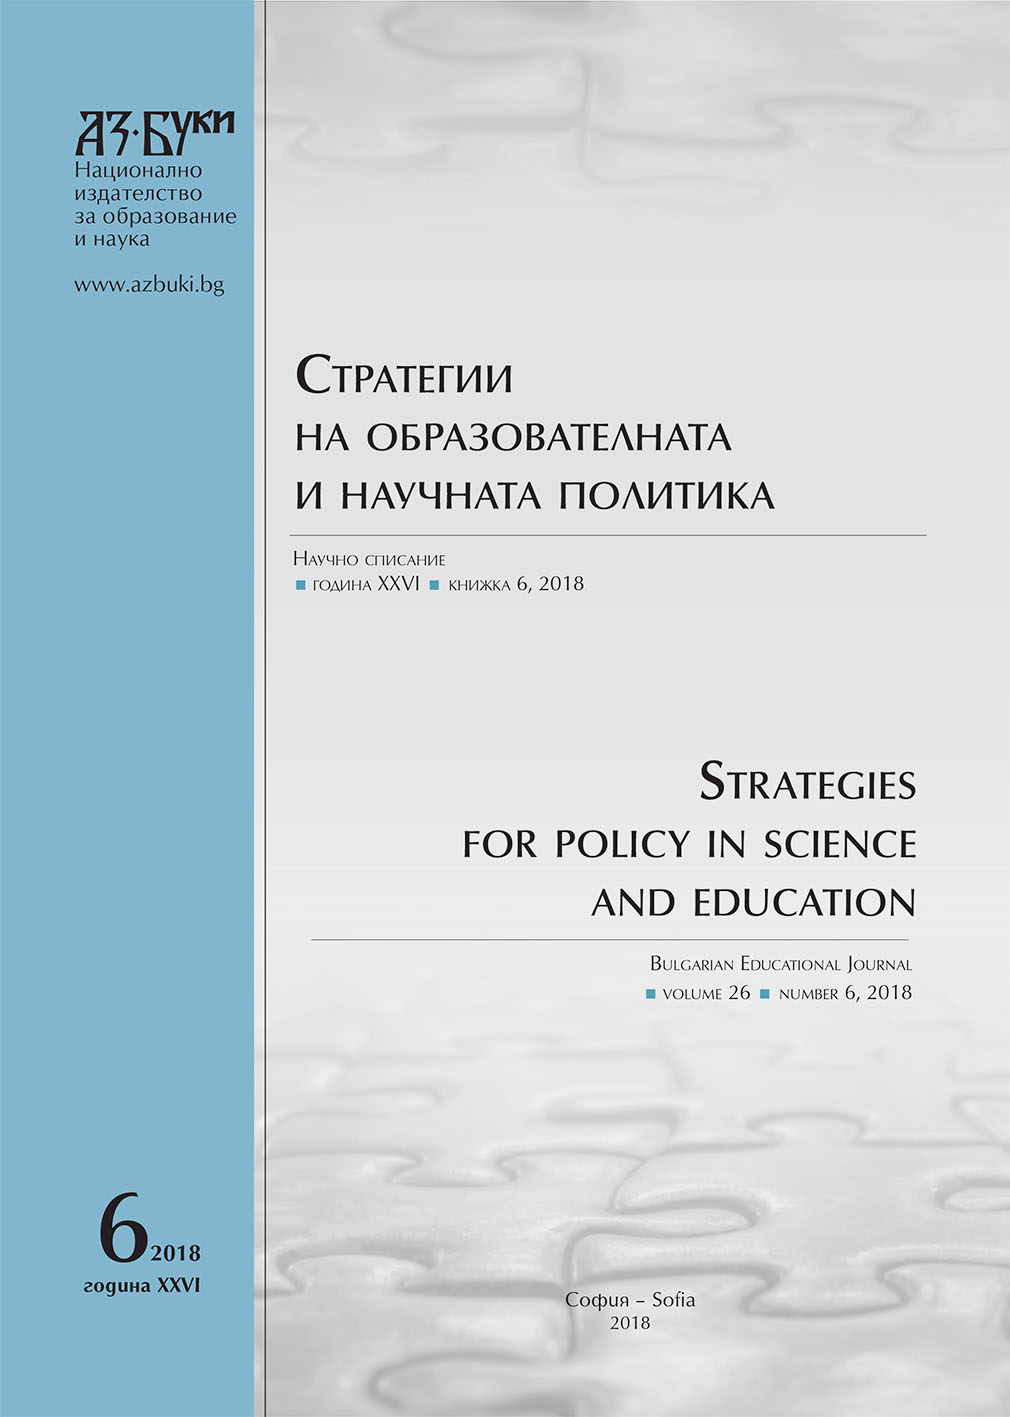 The Higher School Accreditation as Warranty for Quality of the Higher Education in the Context of the Academic Autonomy Cover Image